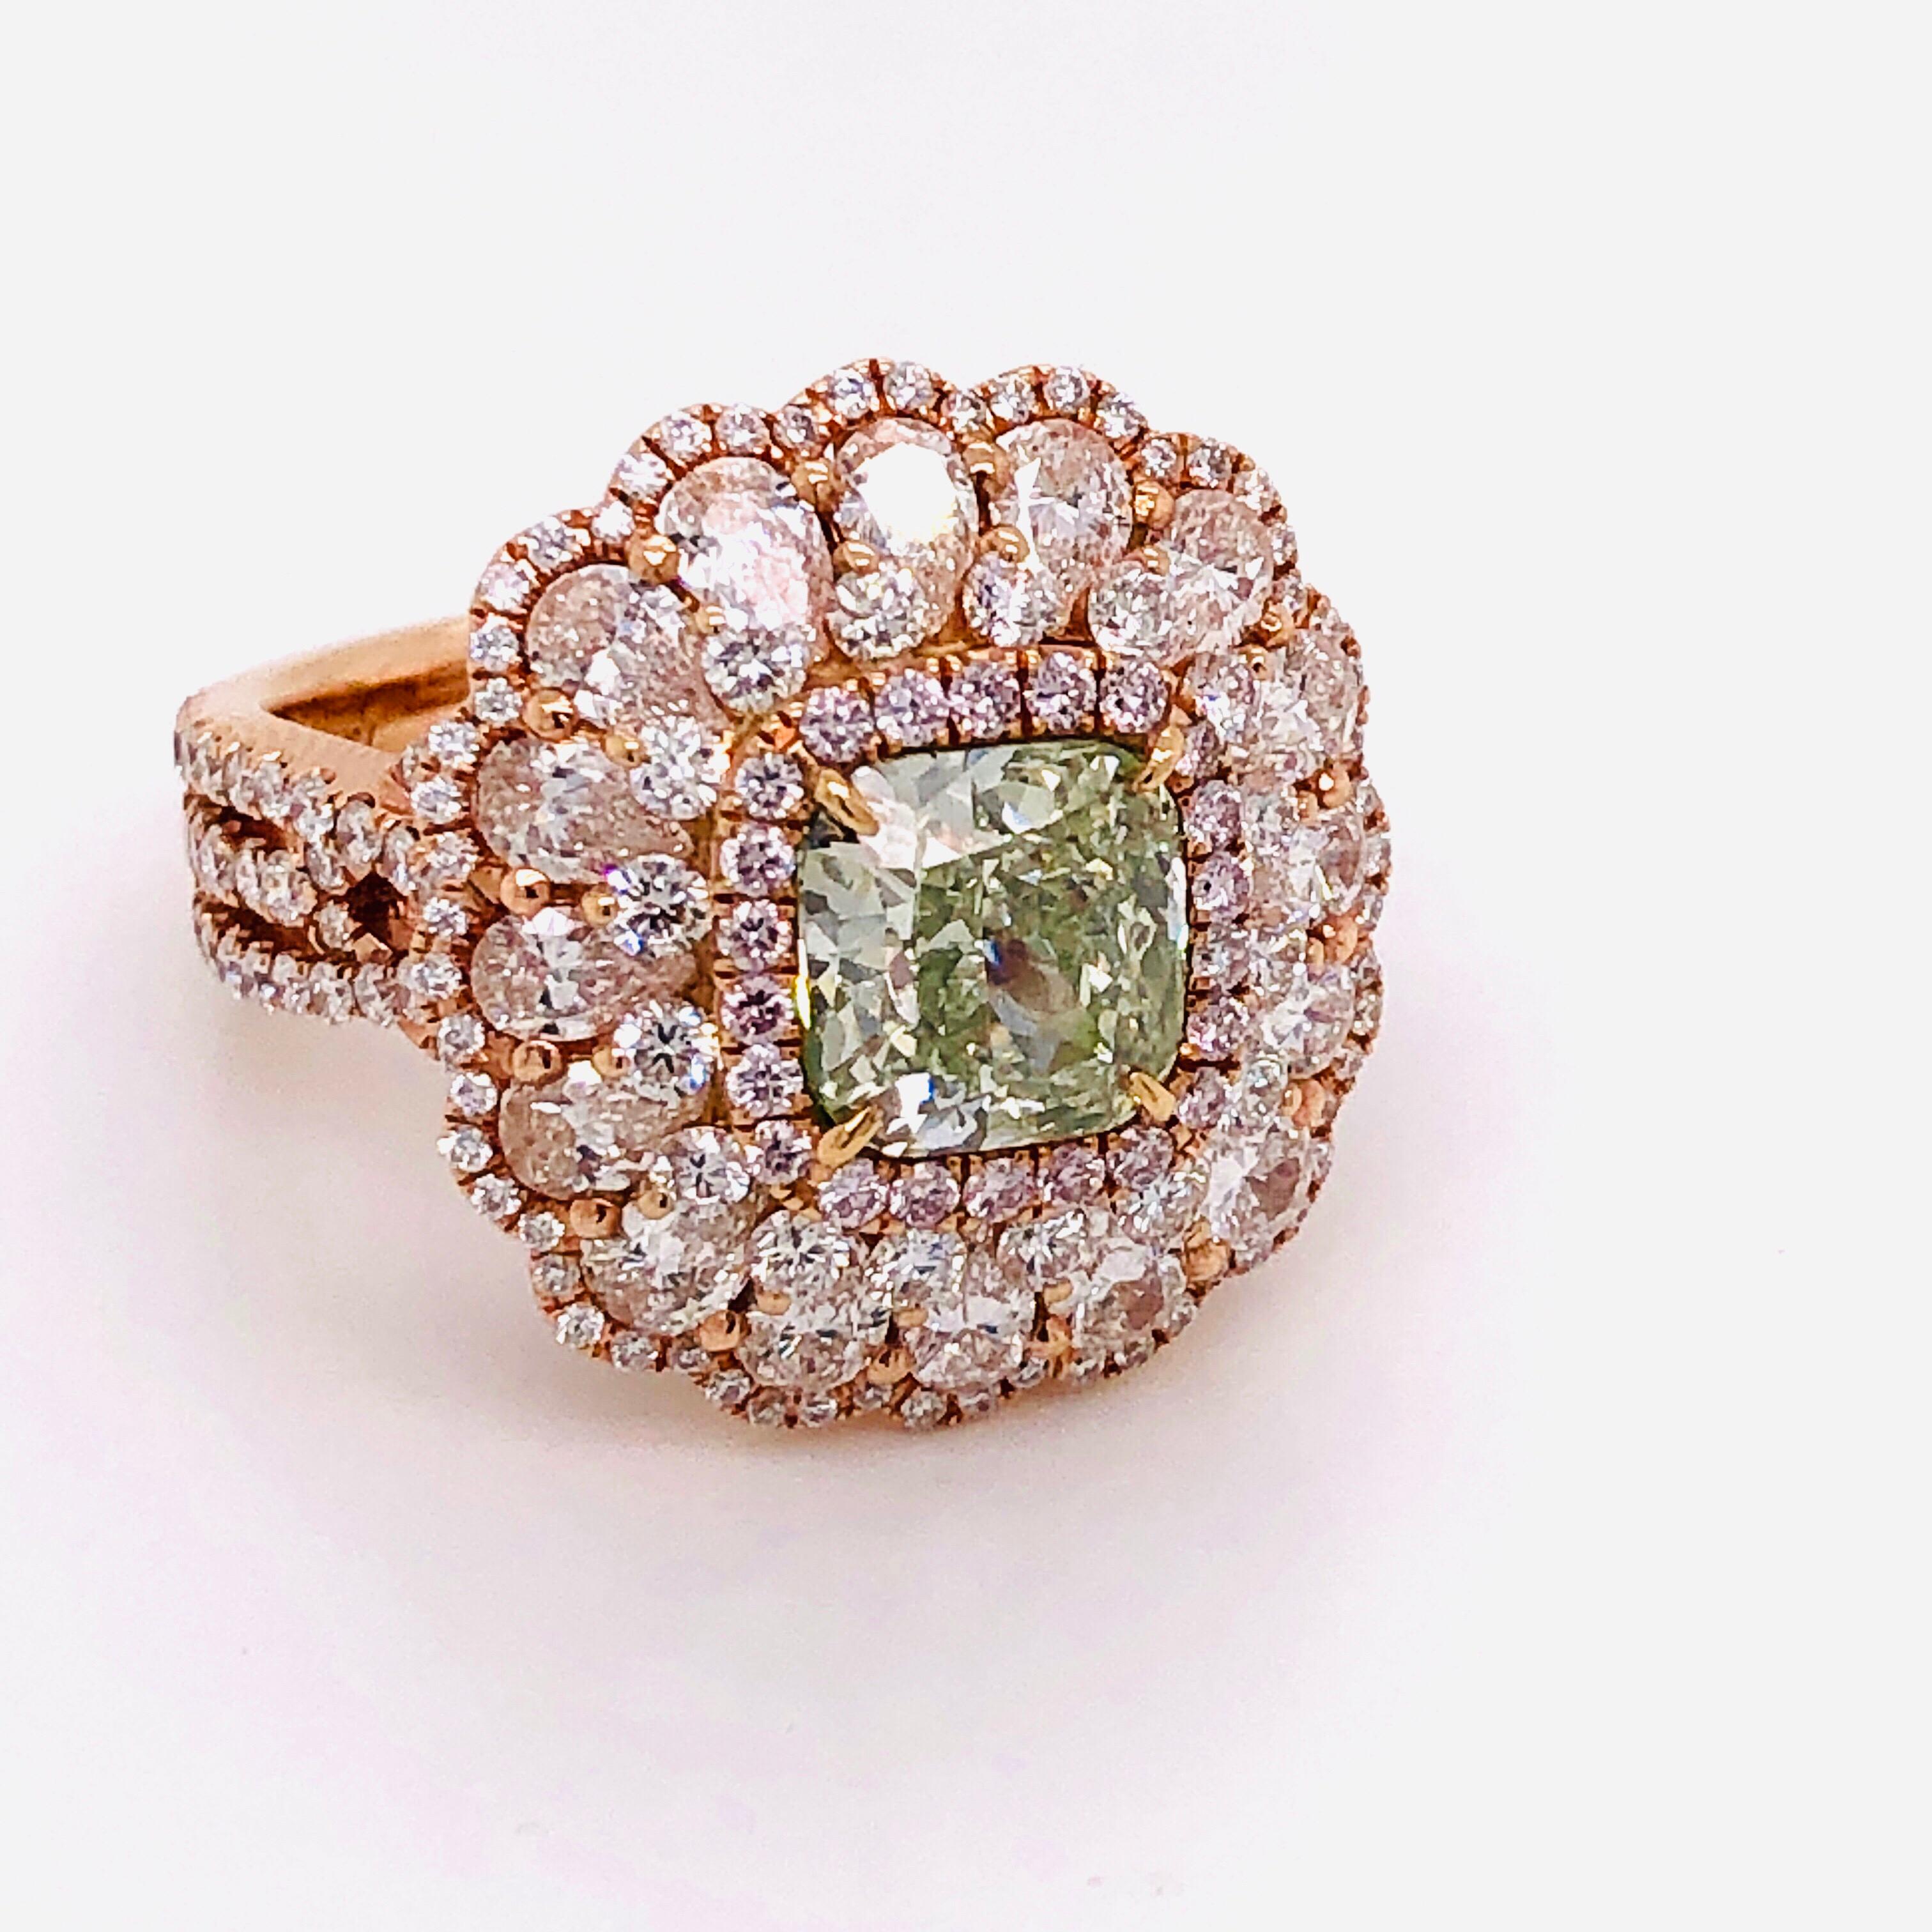 Hand made in the Emilio Atelier Showcasing a spectacular GIA certified 2.18ct Natural fancy green diamond with excellent saturation throughout. The clarity is Vs2. Please send us a message to request a copy of the GIA report. This design features a